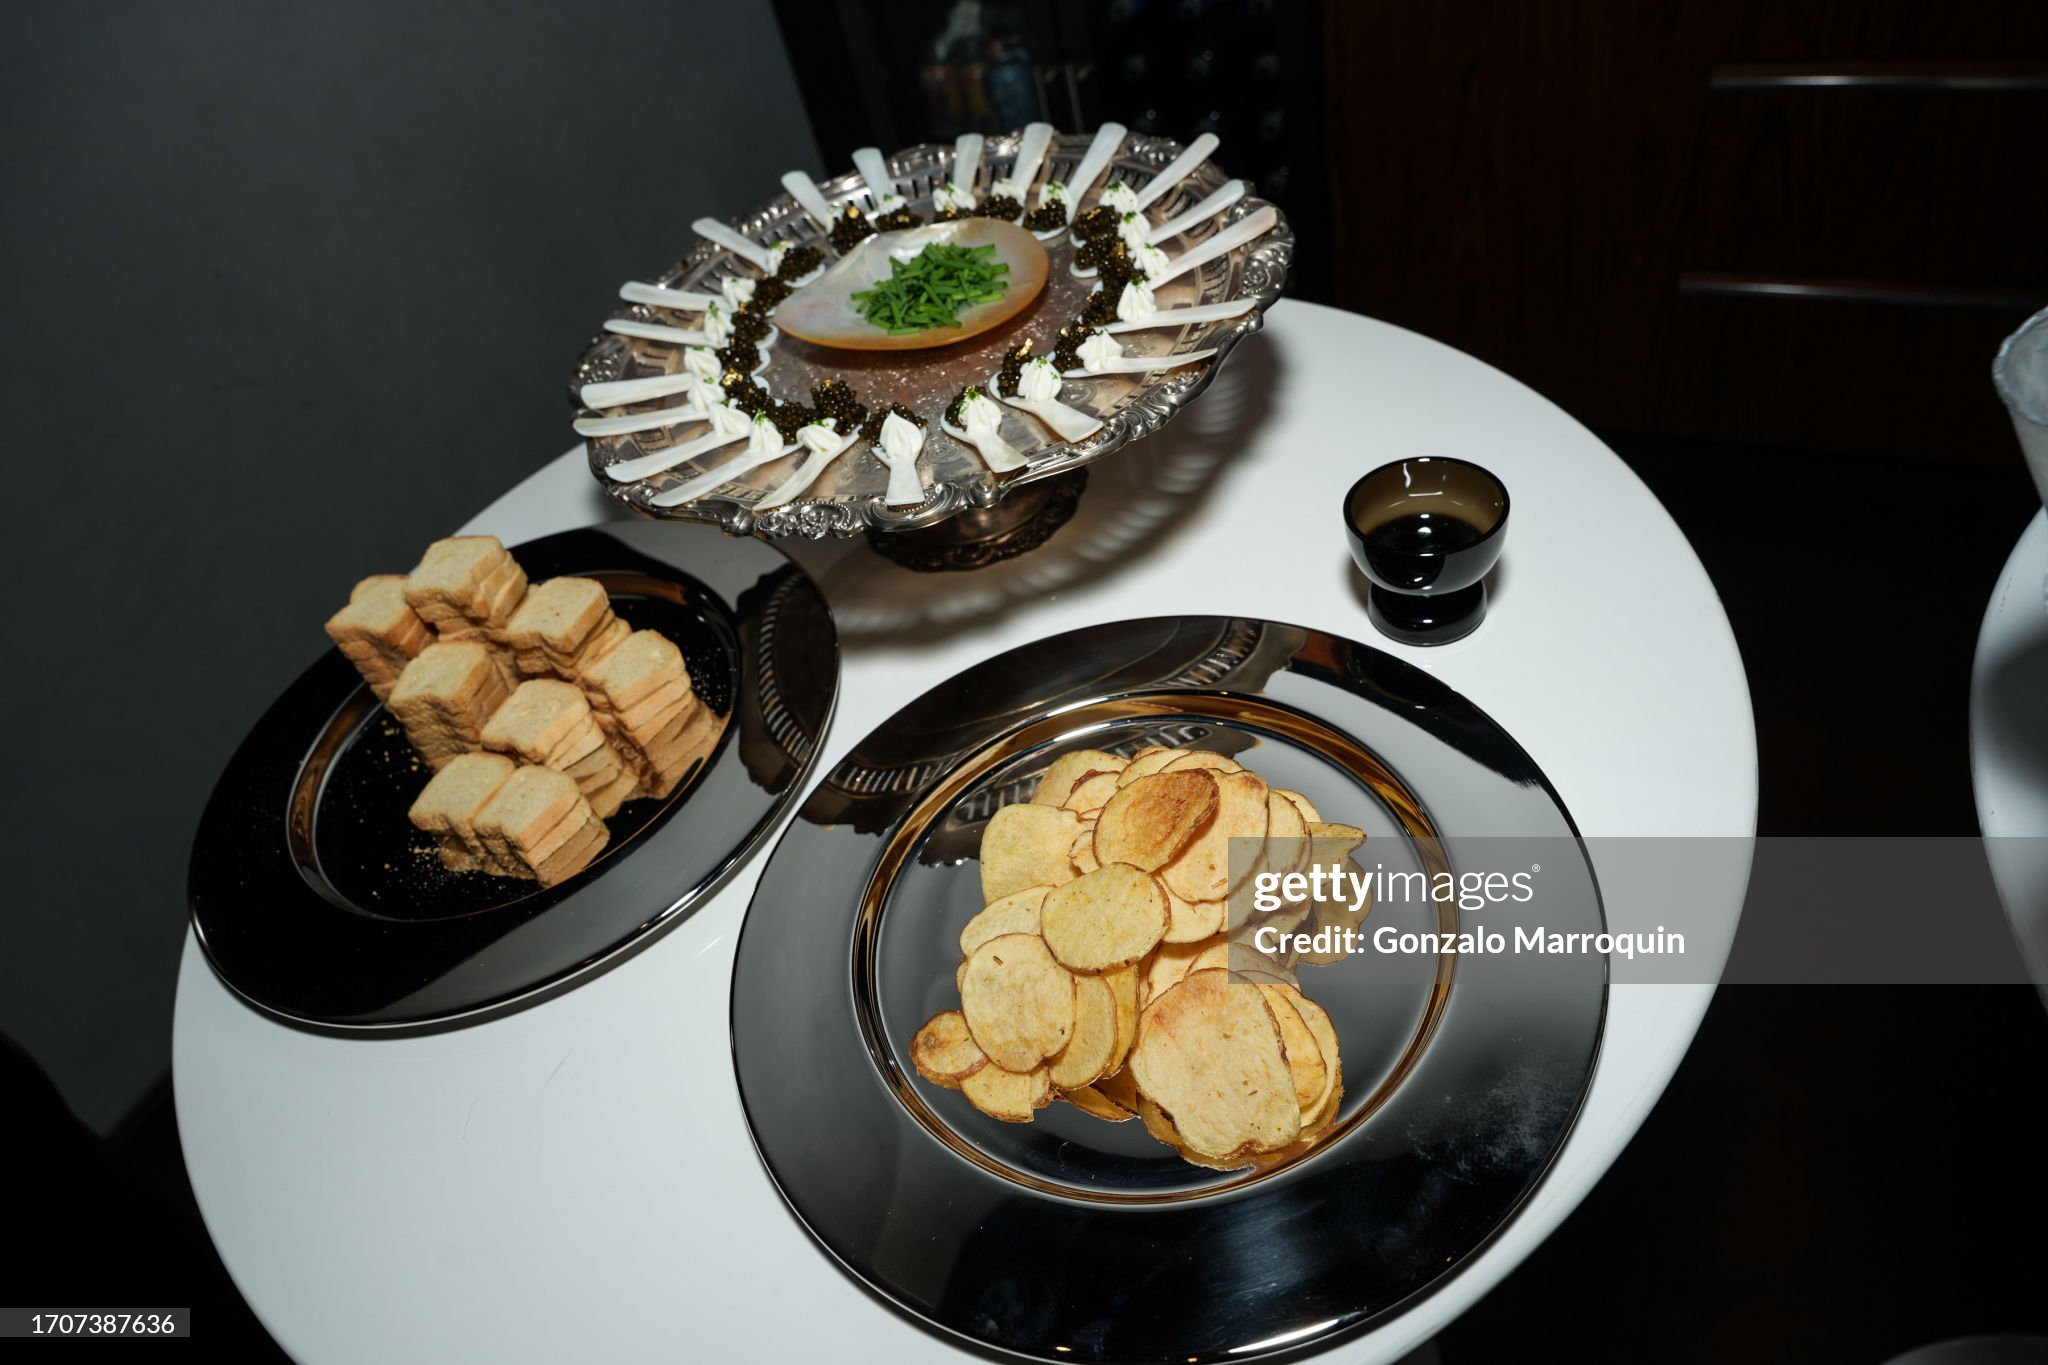 gettyimages-1707387636-2048x2048.jpg